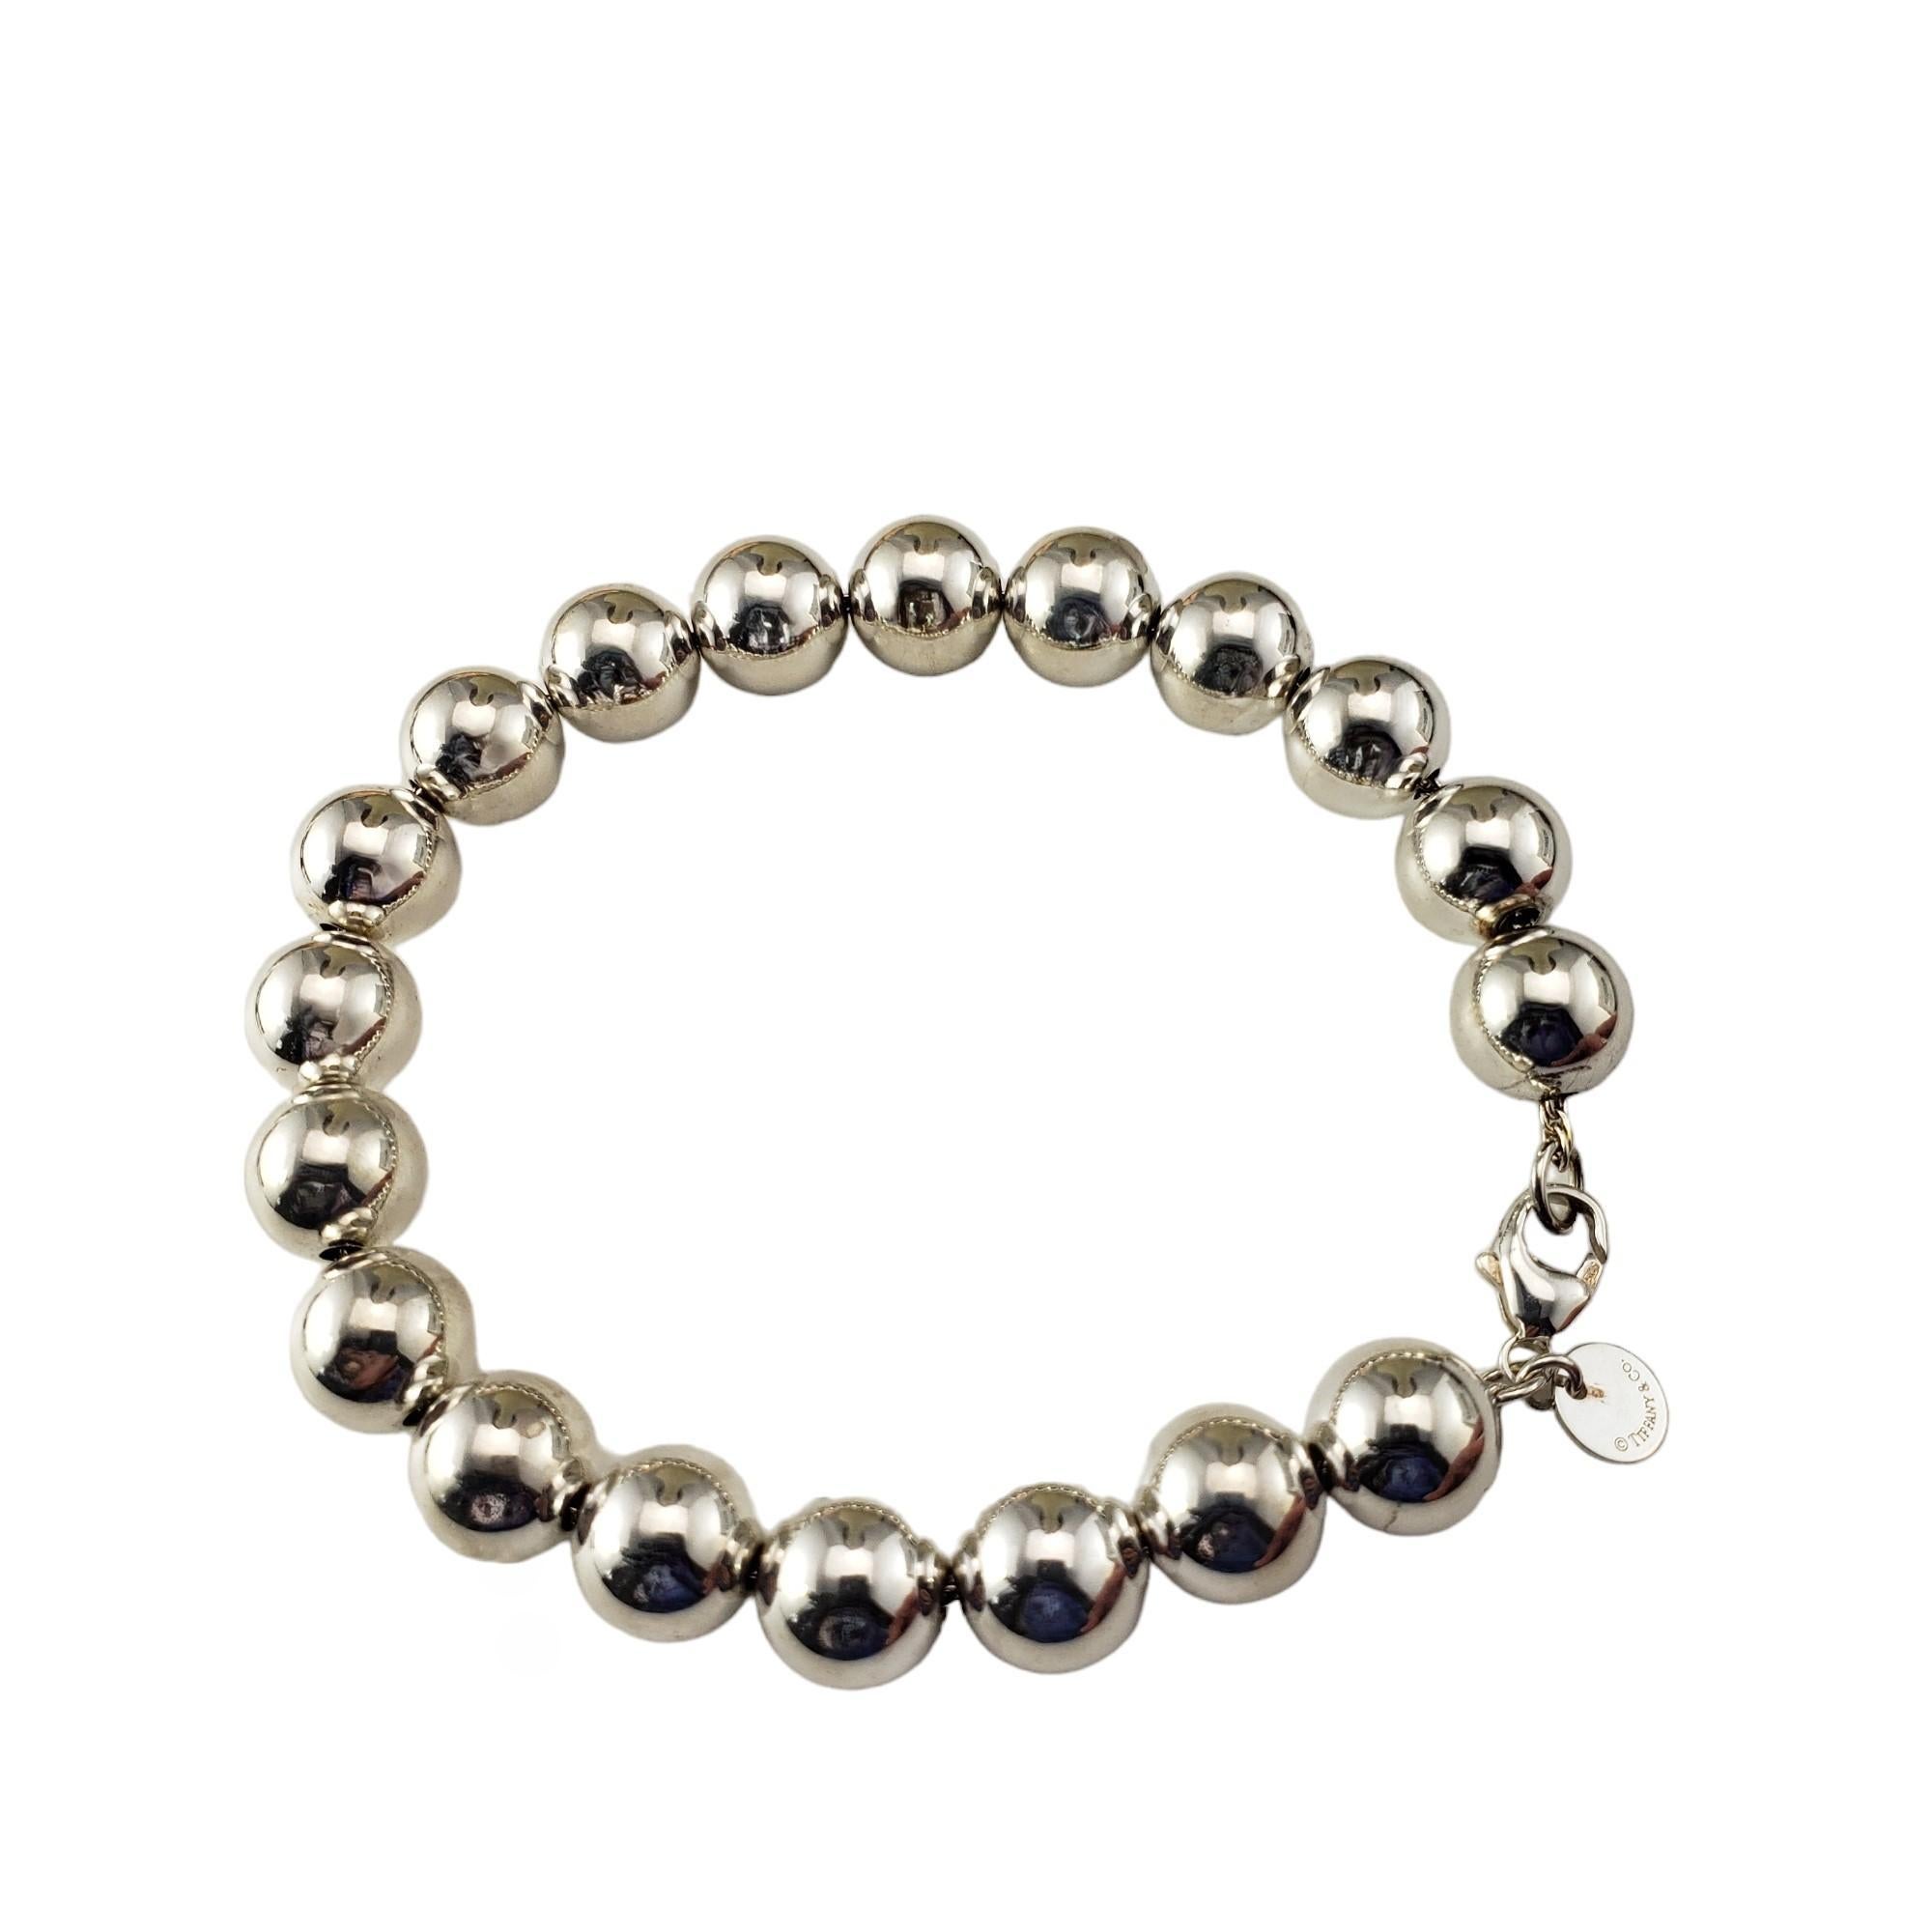 Tiffany & Co. Sterling Silver Ball Bracelet #17162 In Good Condition For Sale In Washington Depot, CT